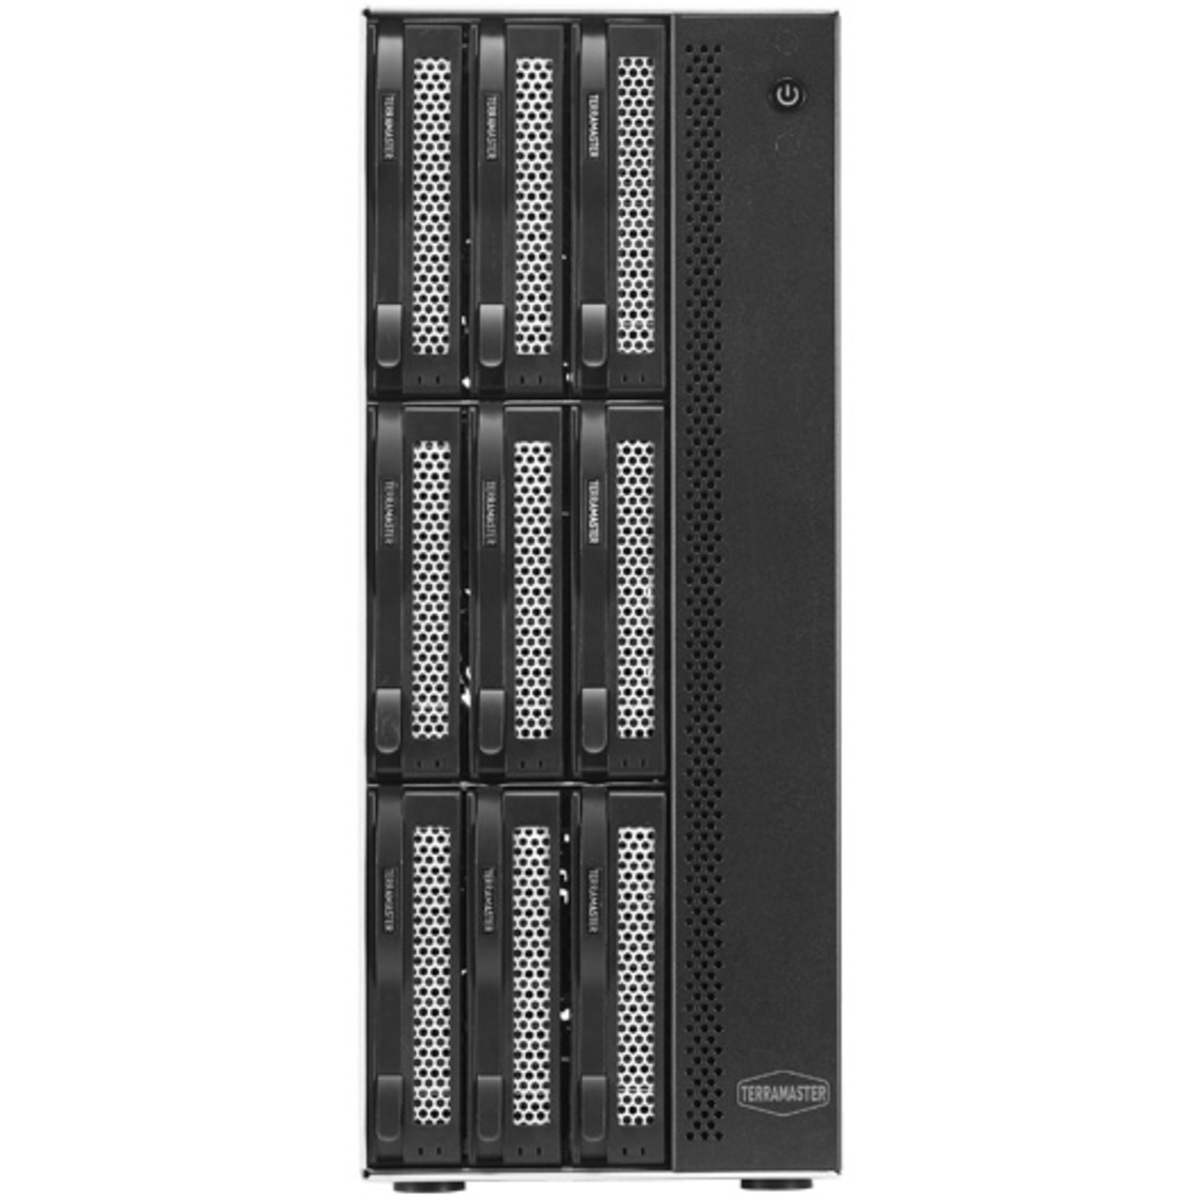 TerraMaster T9-423 50tb 9-Bay Desktop Multimedia / Power User / Business NAS - Network Attached Storage Device 5x10tb Western Digital Red Pro WD102KFBX 3.5 7200rpm SATA 6Gb/s HDD NAS Class Drives Installed - Burn-In Tested T9-423